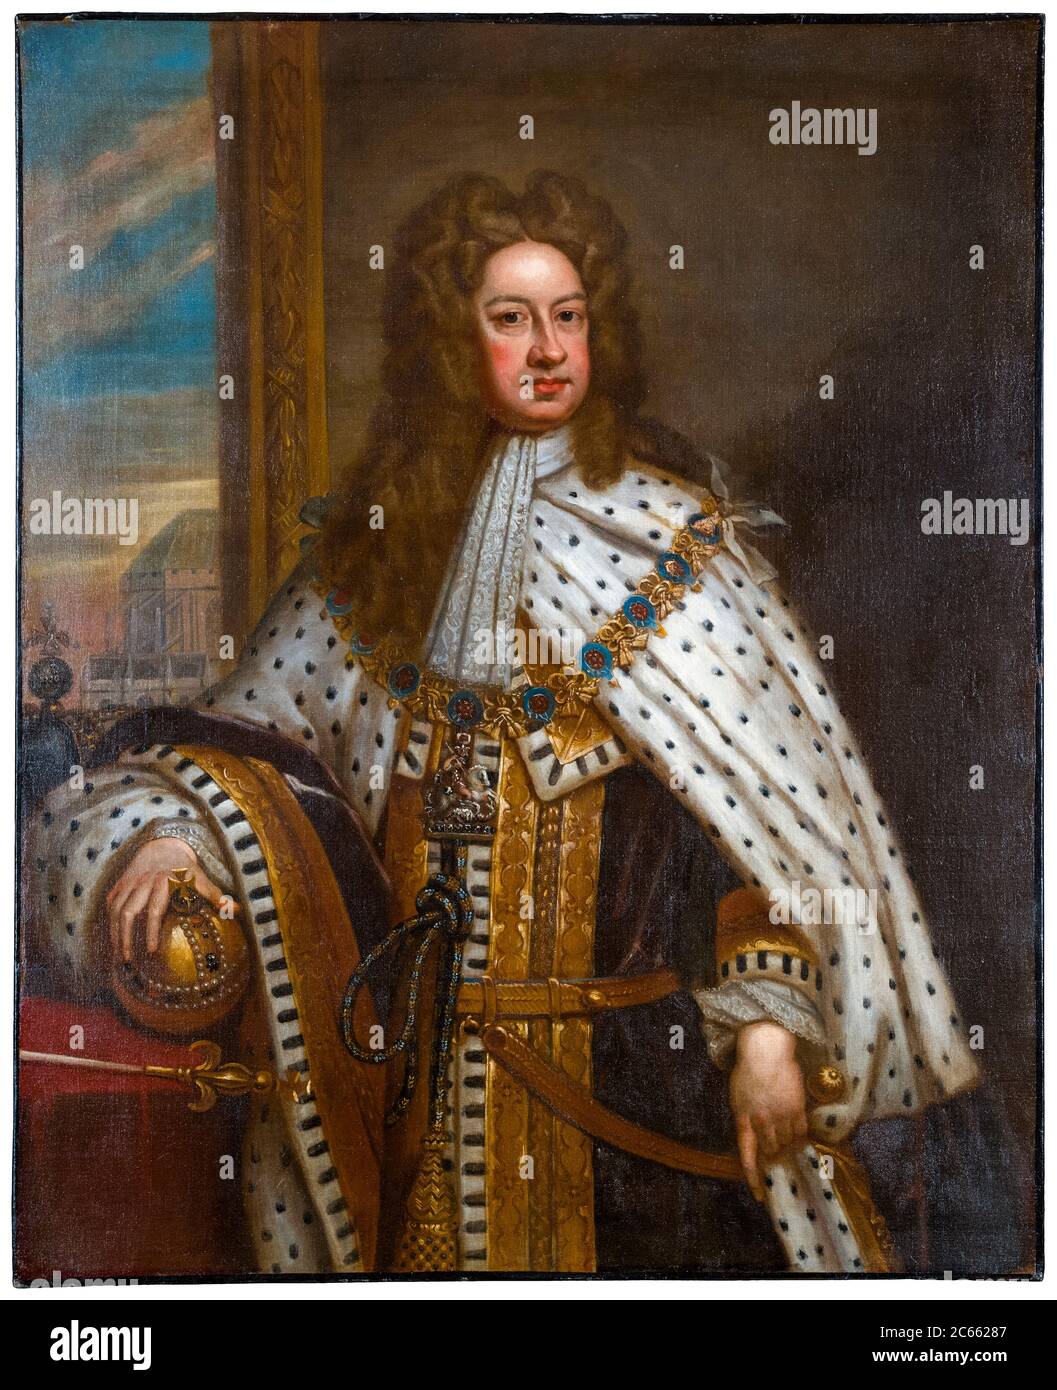 King George I of Great Britain and Ireland (1660-1727), reign (1714-1727), portrait painting by Sir Godfrey Kneller, 1714 Stock Photo